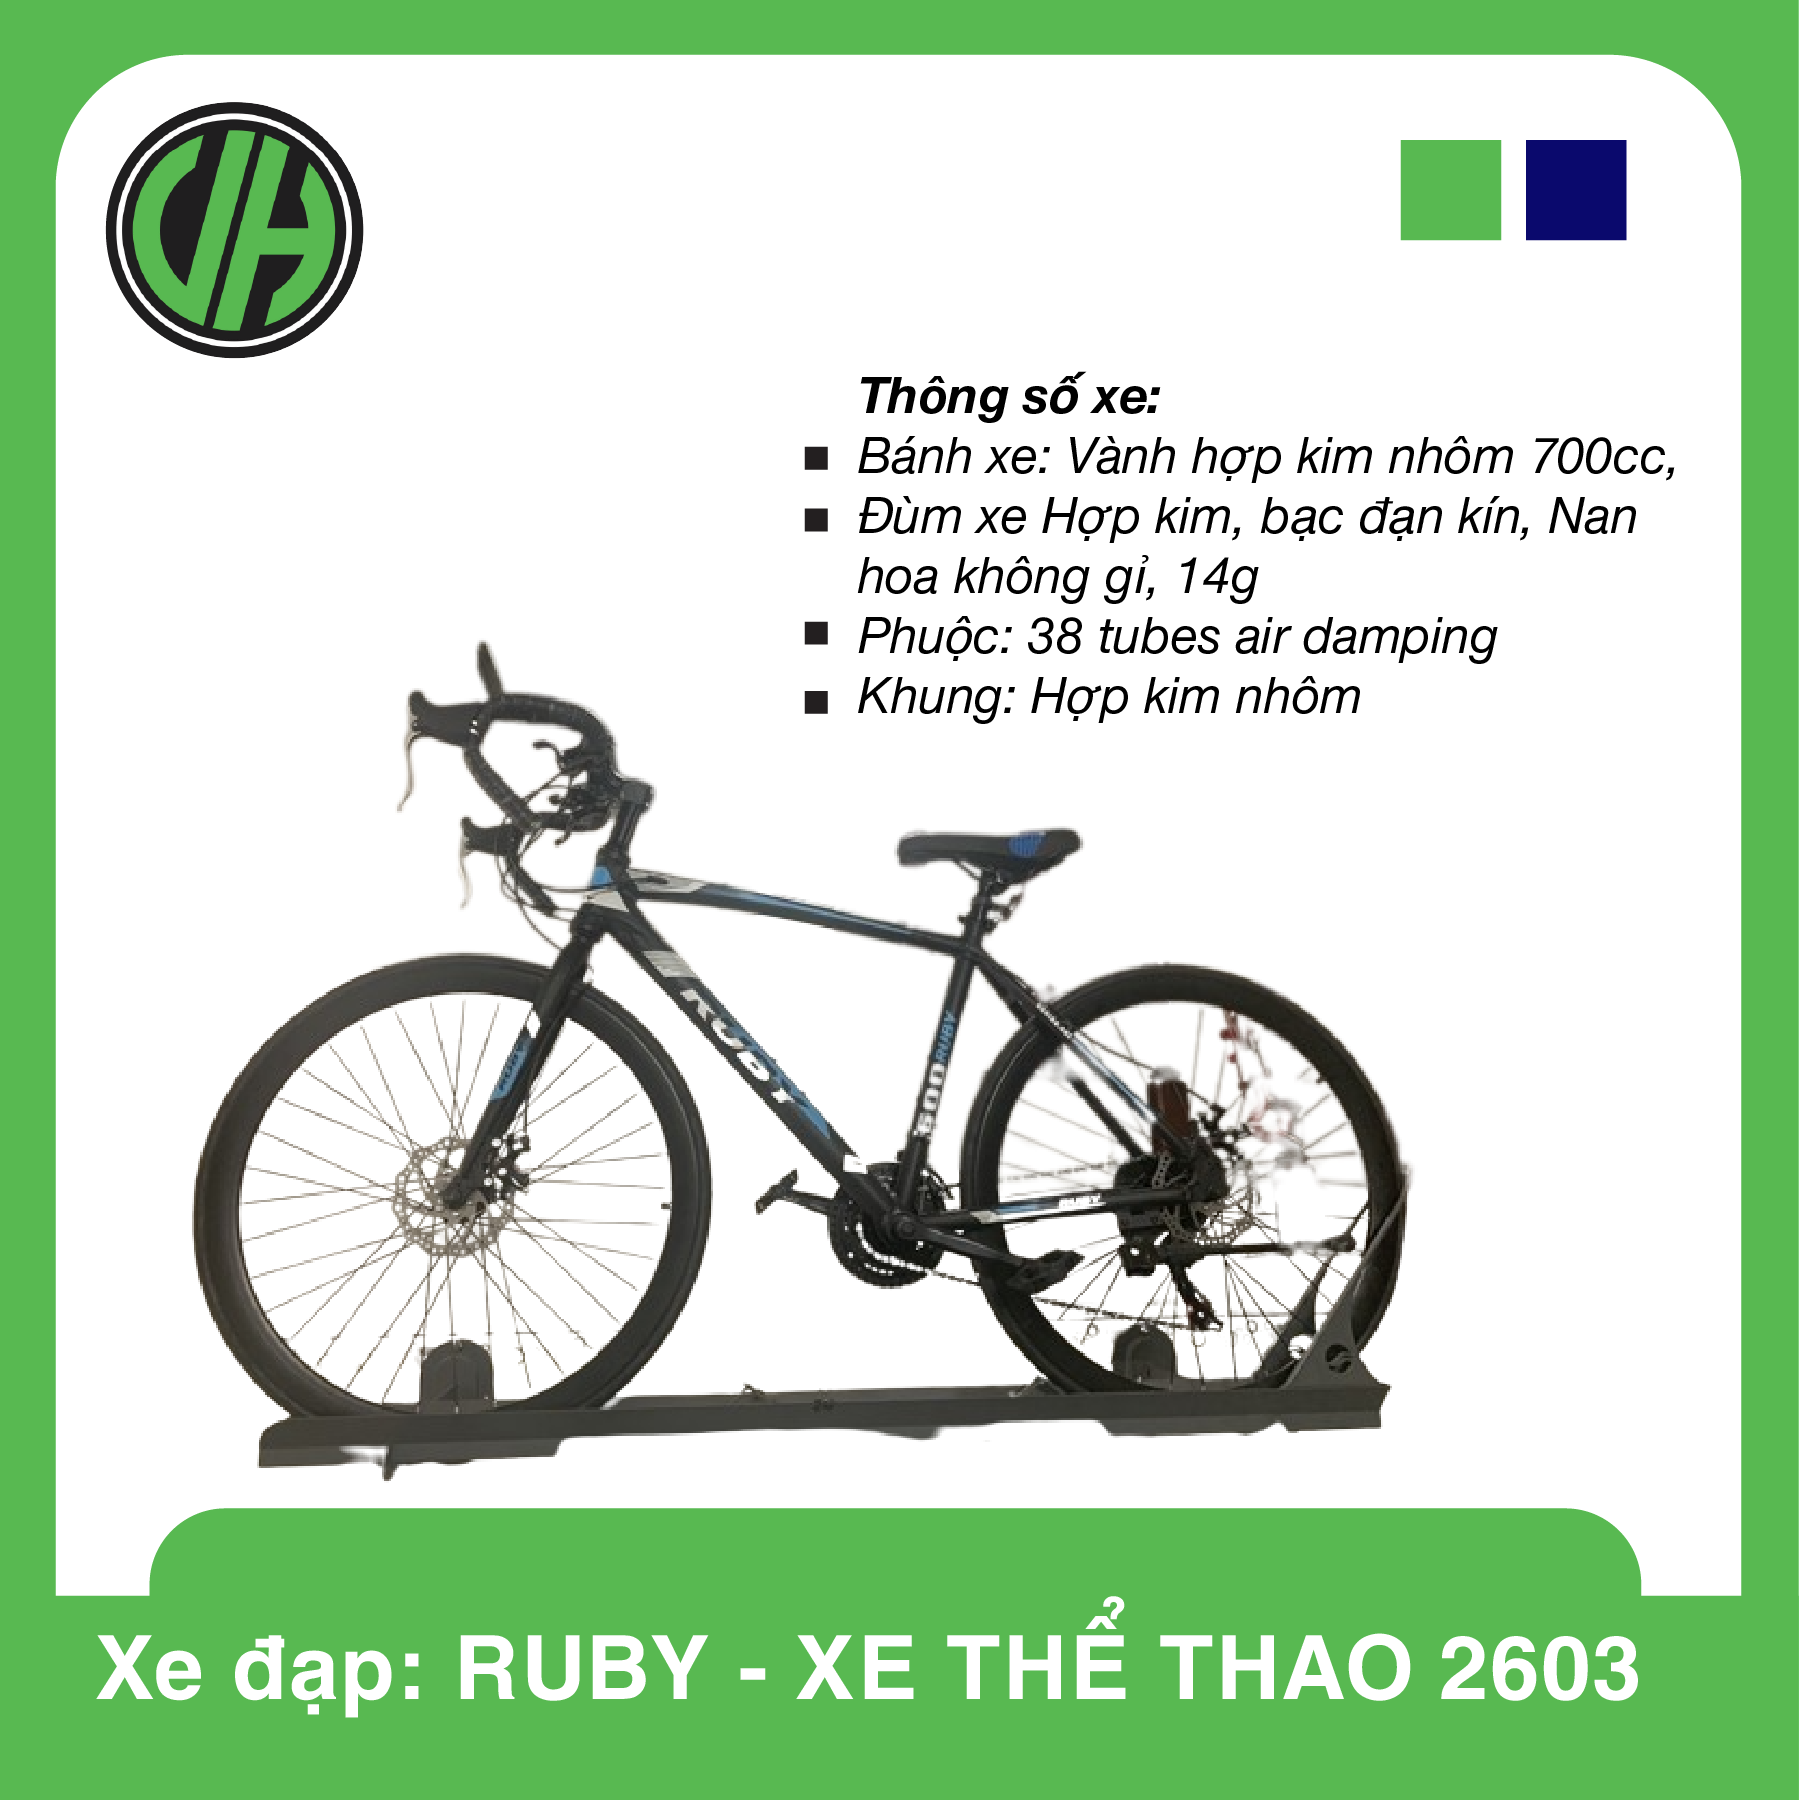 RUBY - XE THỂ THAO 2603